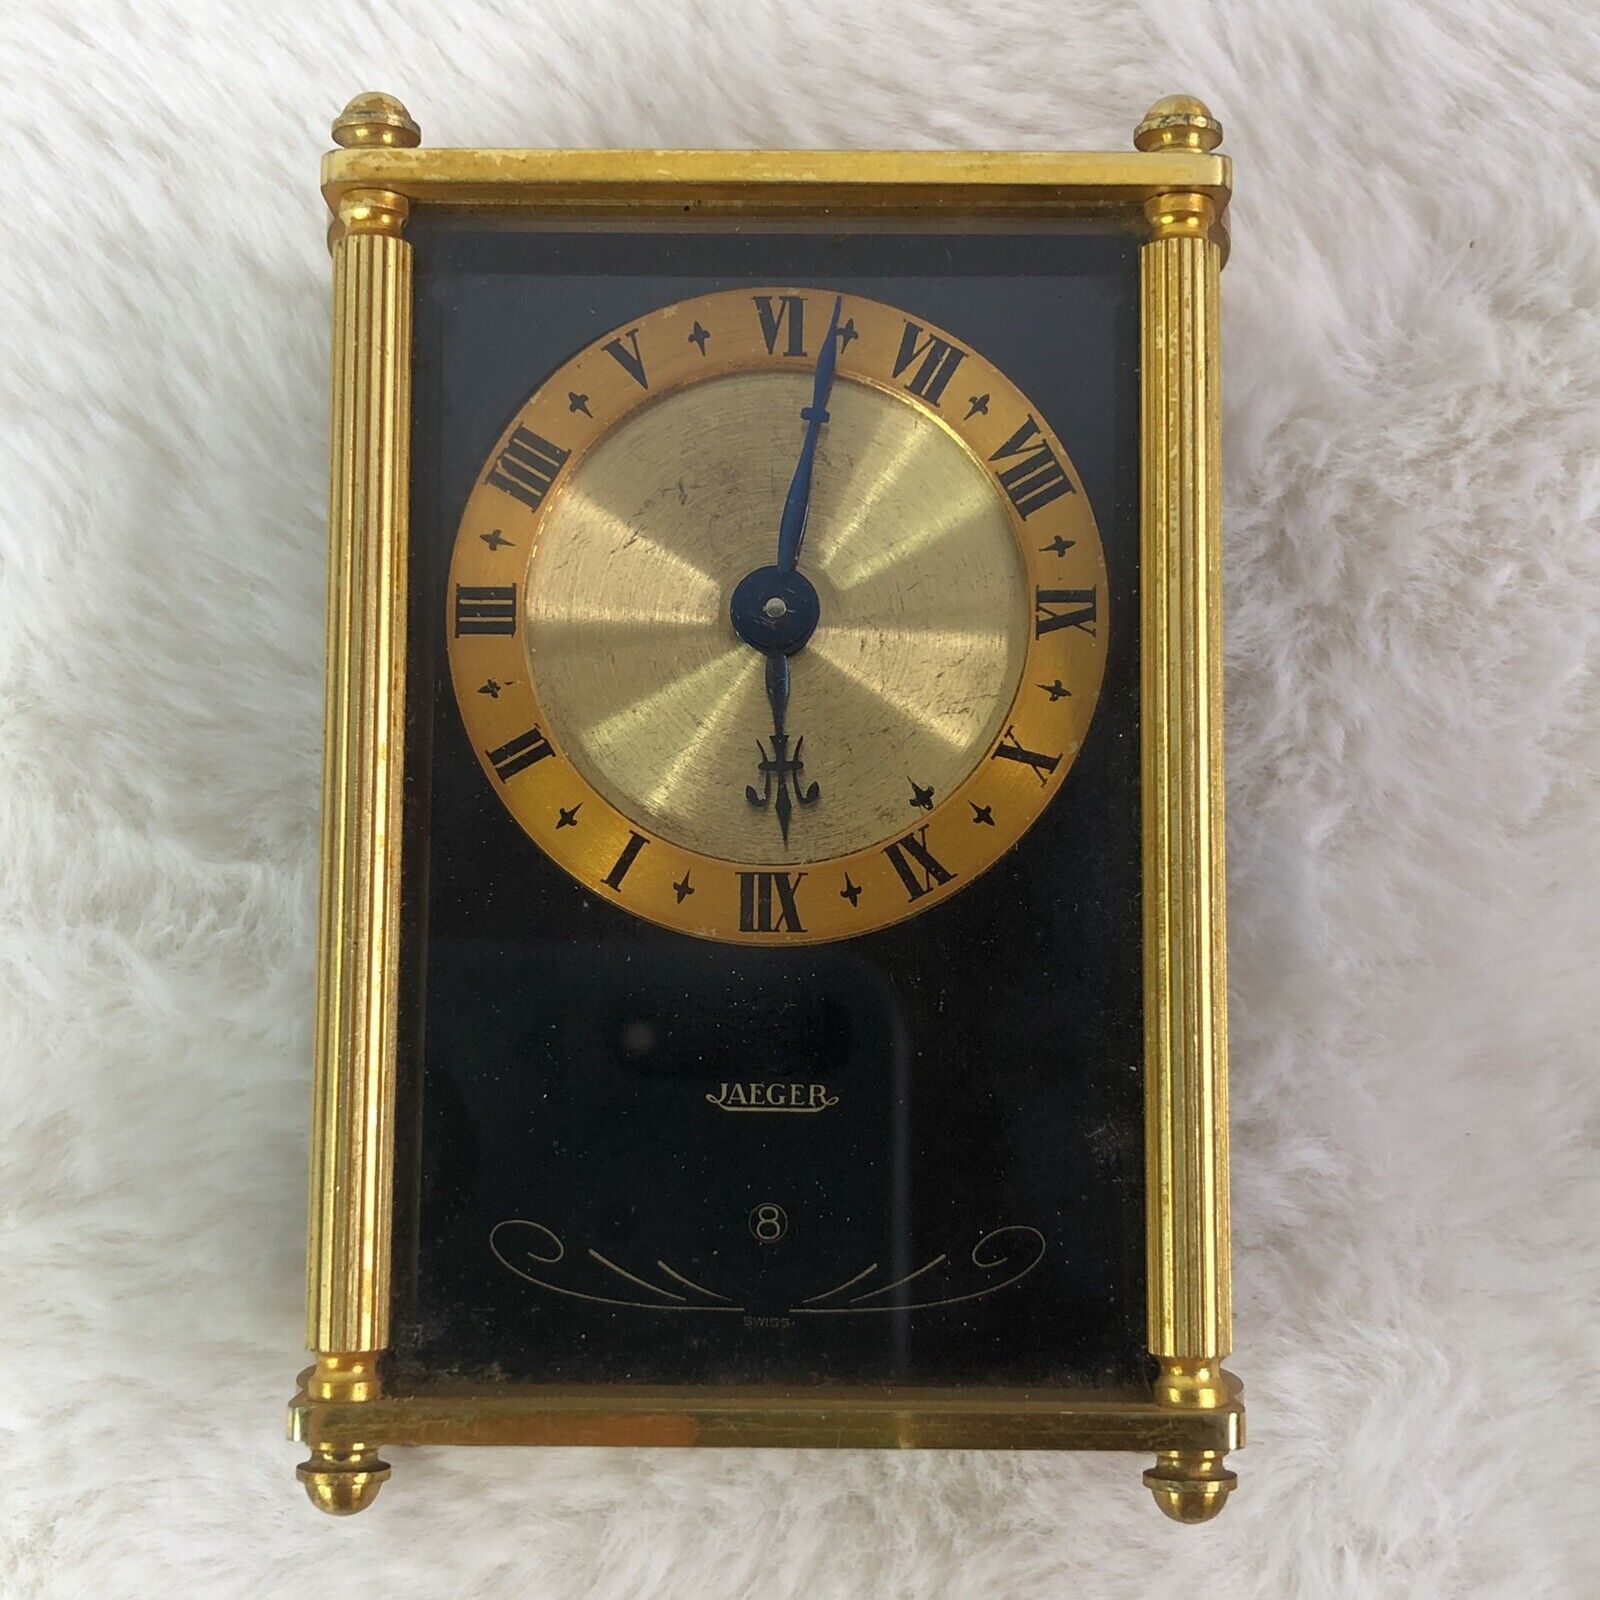 Jaeger LeCoultre 8 Day Musical Alarm Clock **NOT WORKING* Needs Repair**READ**